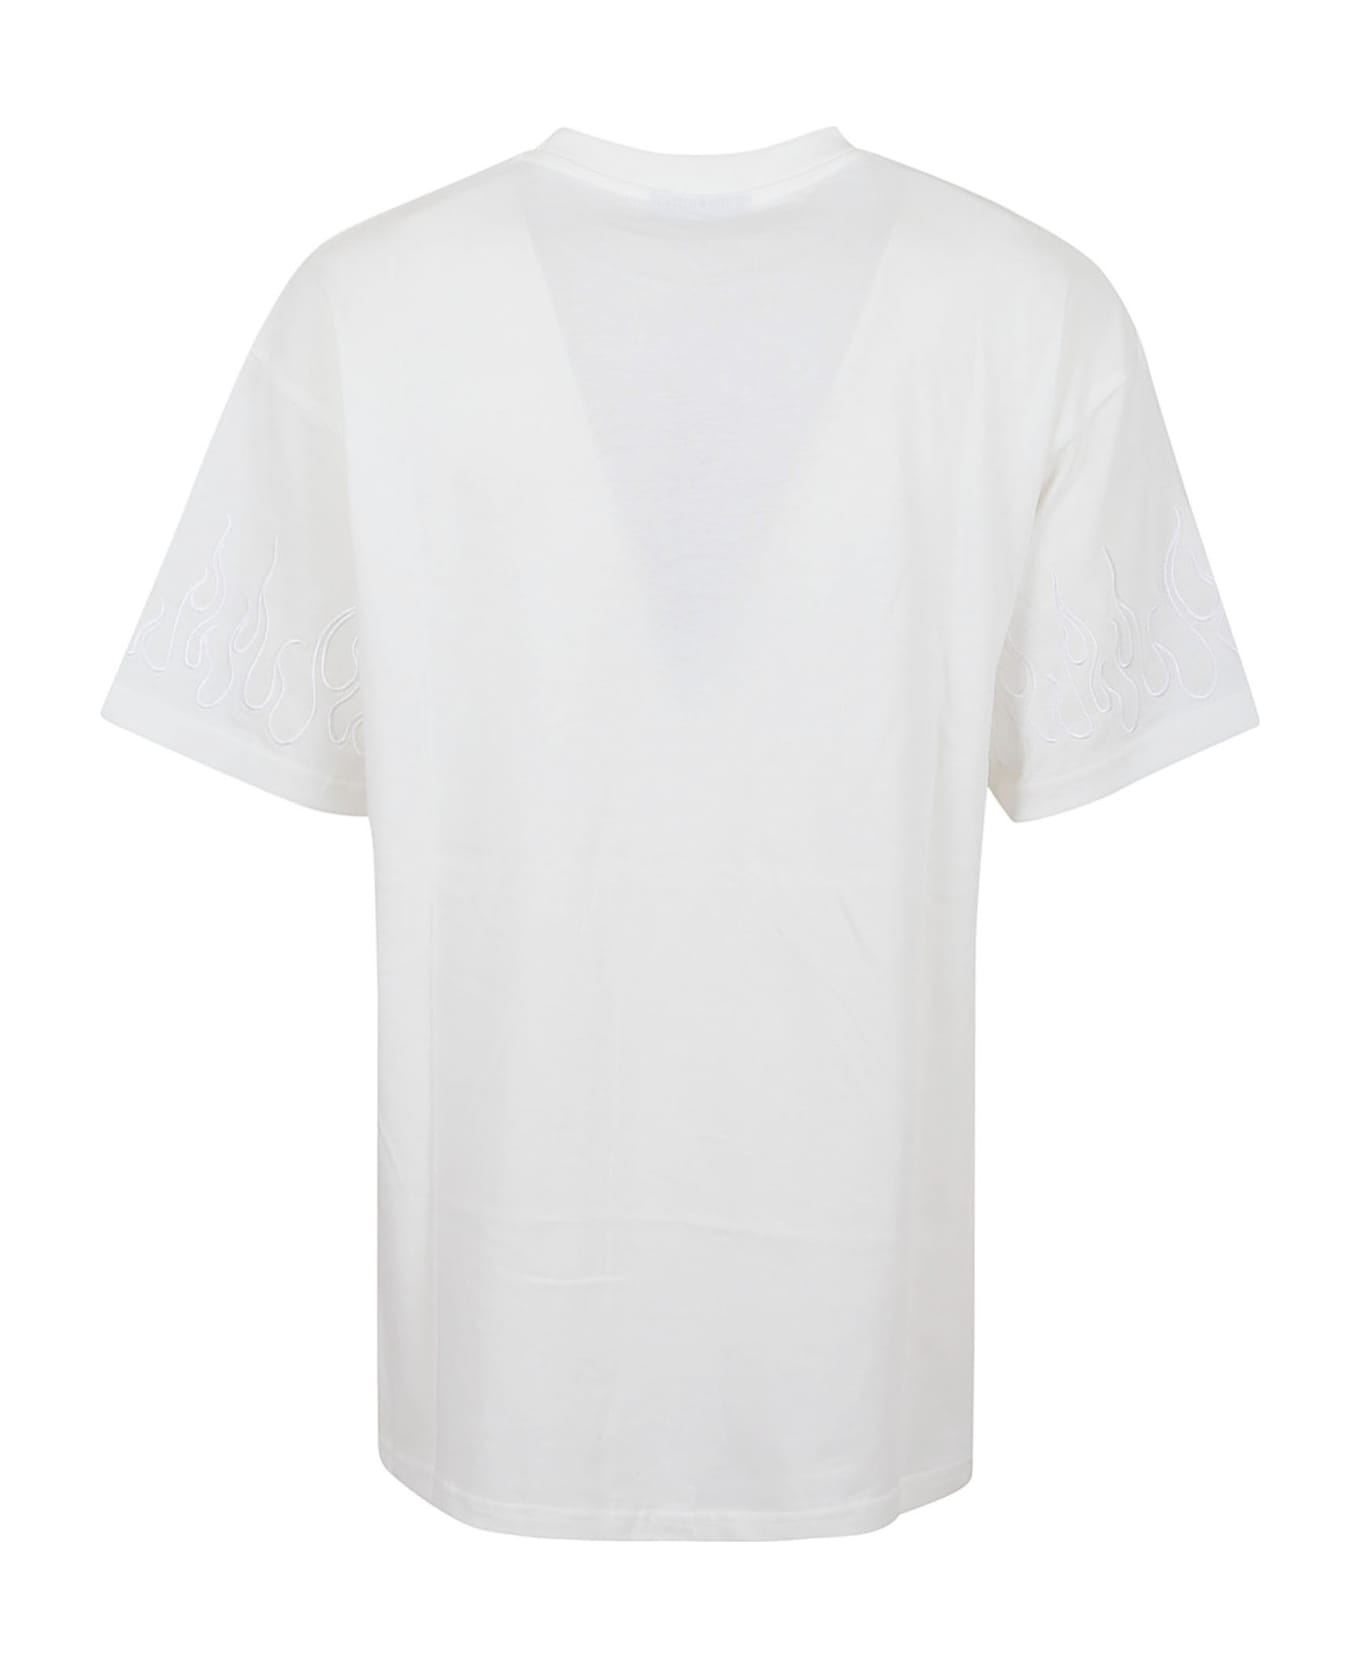 Vision of Super White Tshirt With White Embroidered Flames - White